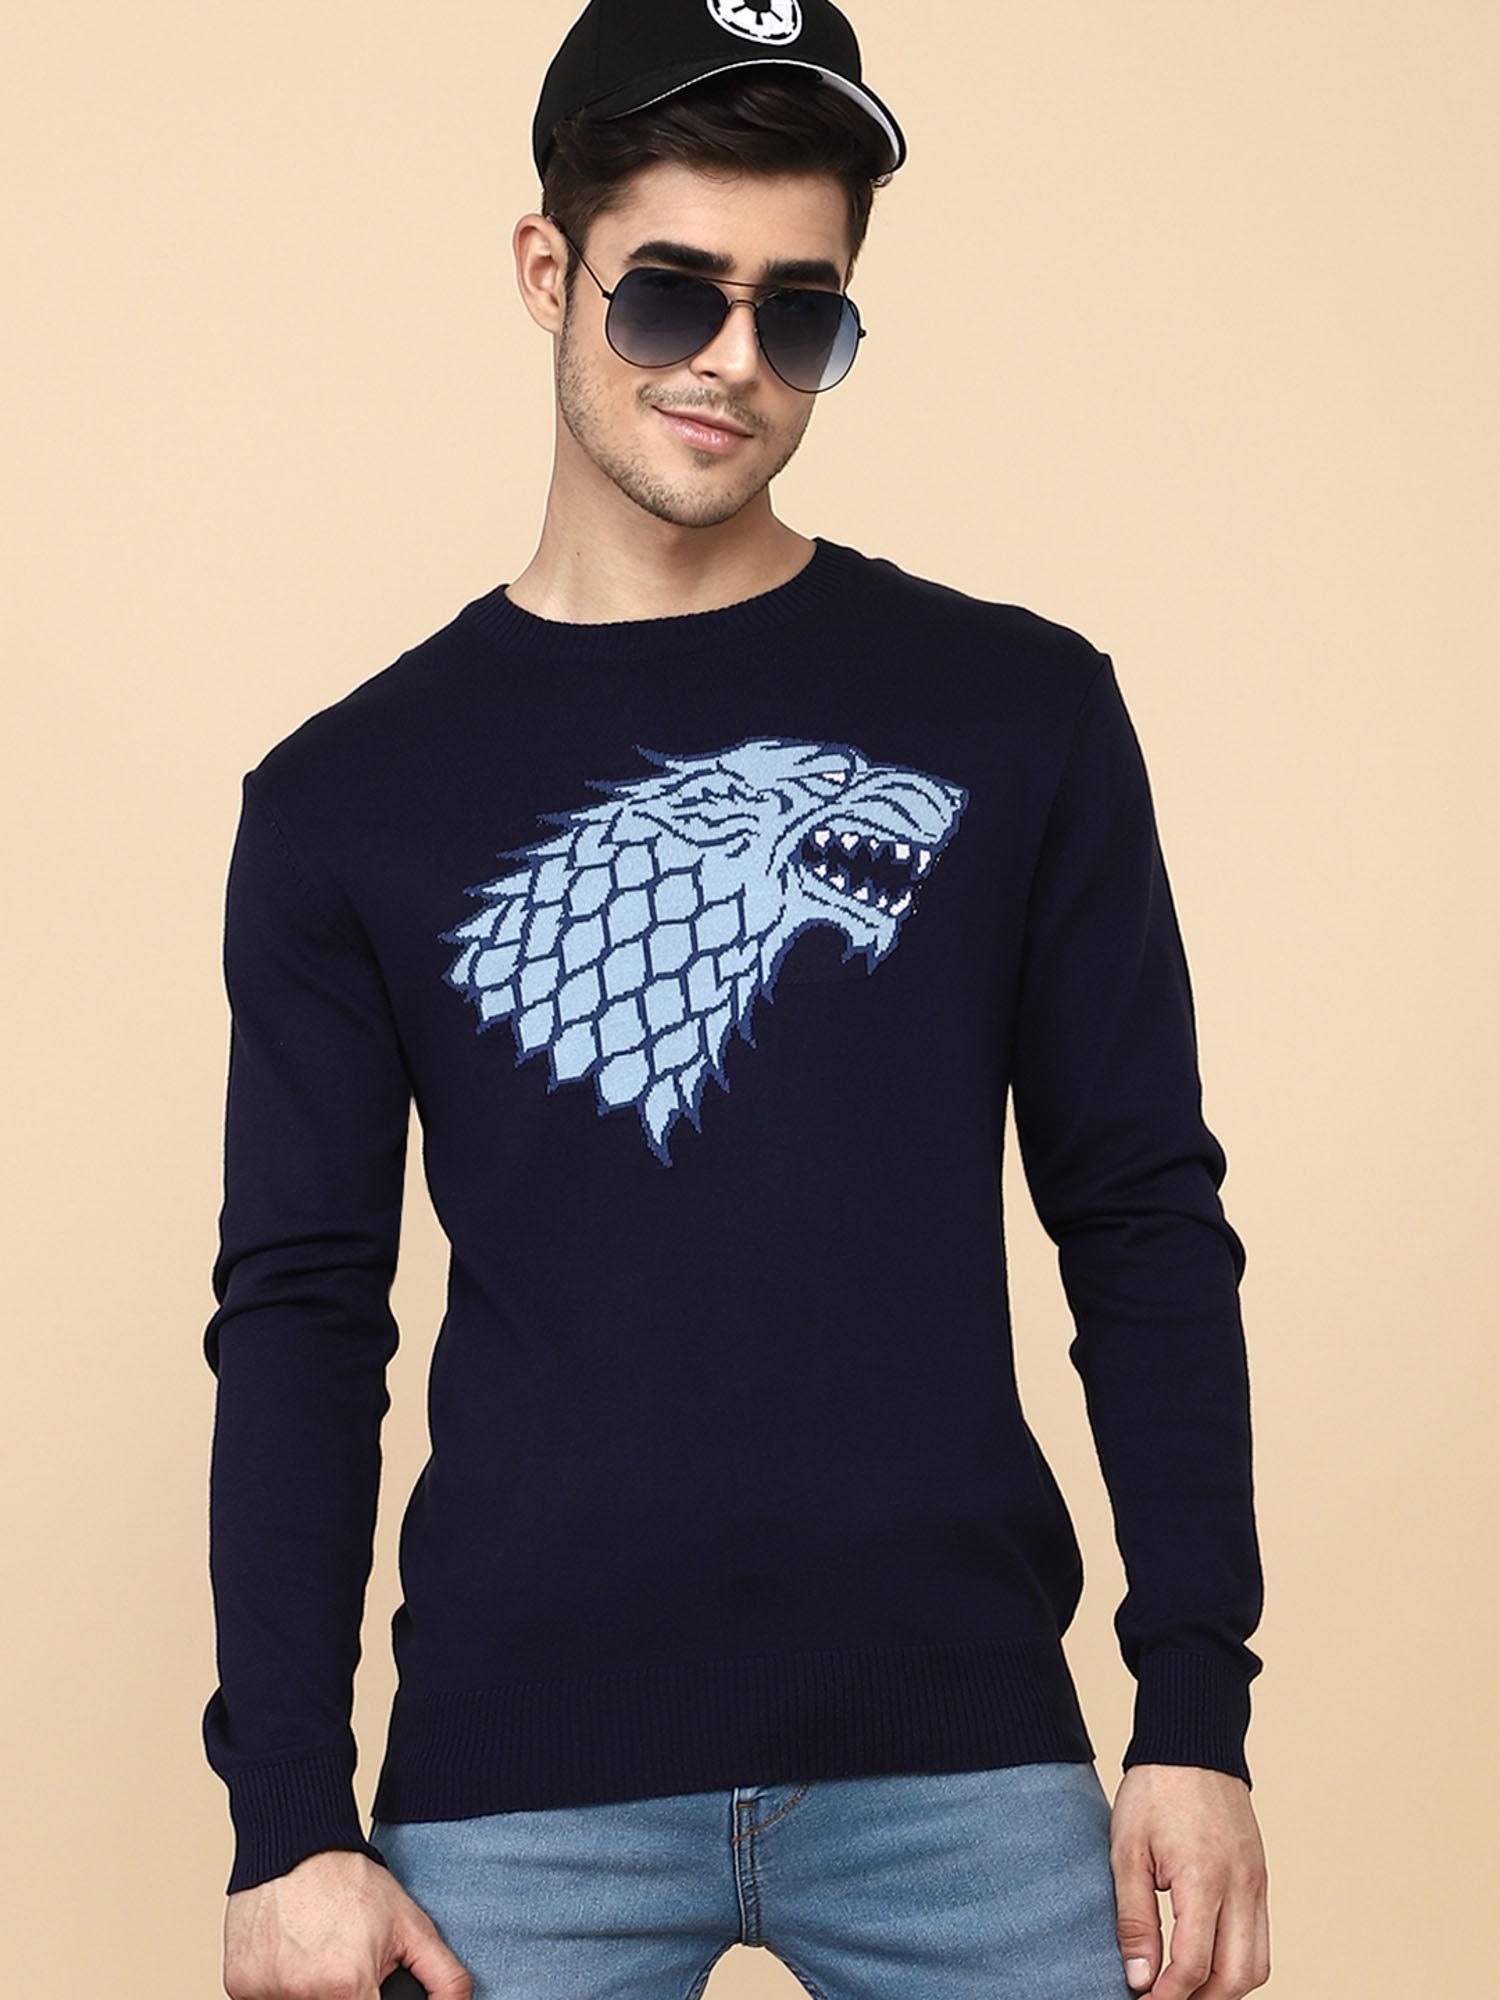 mens game of thrones printed navy blue sweater